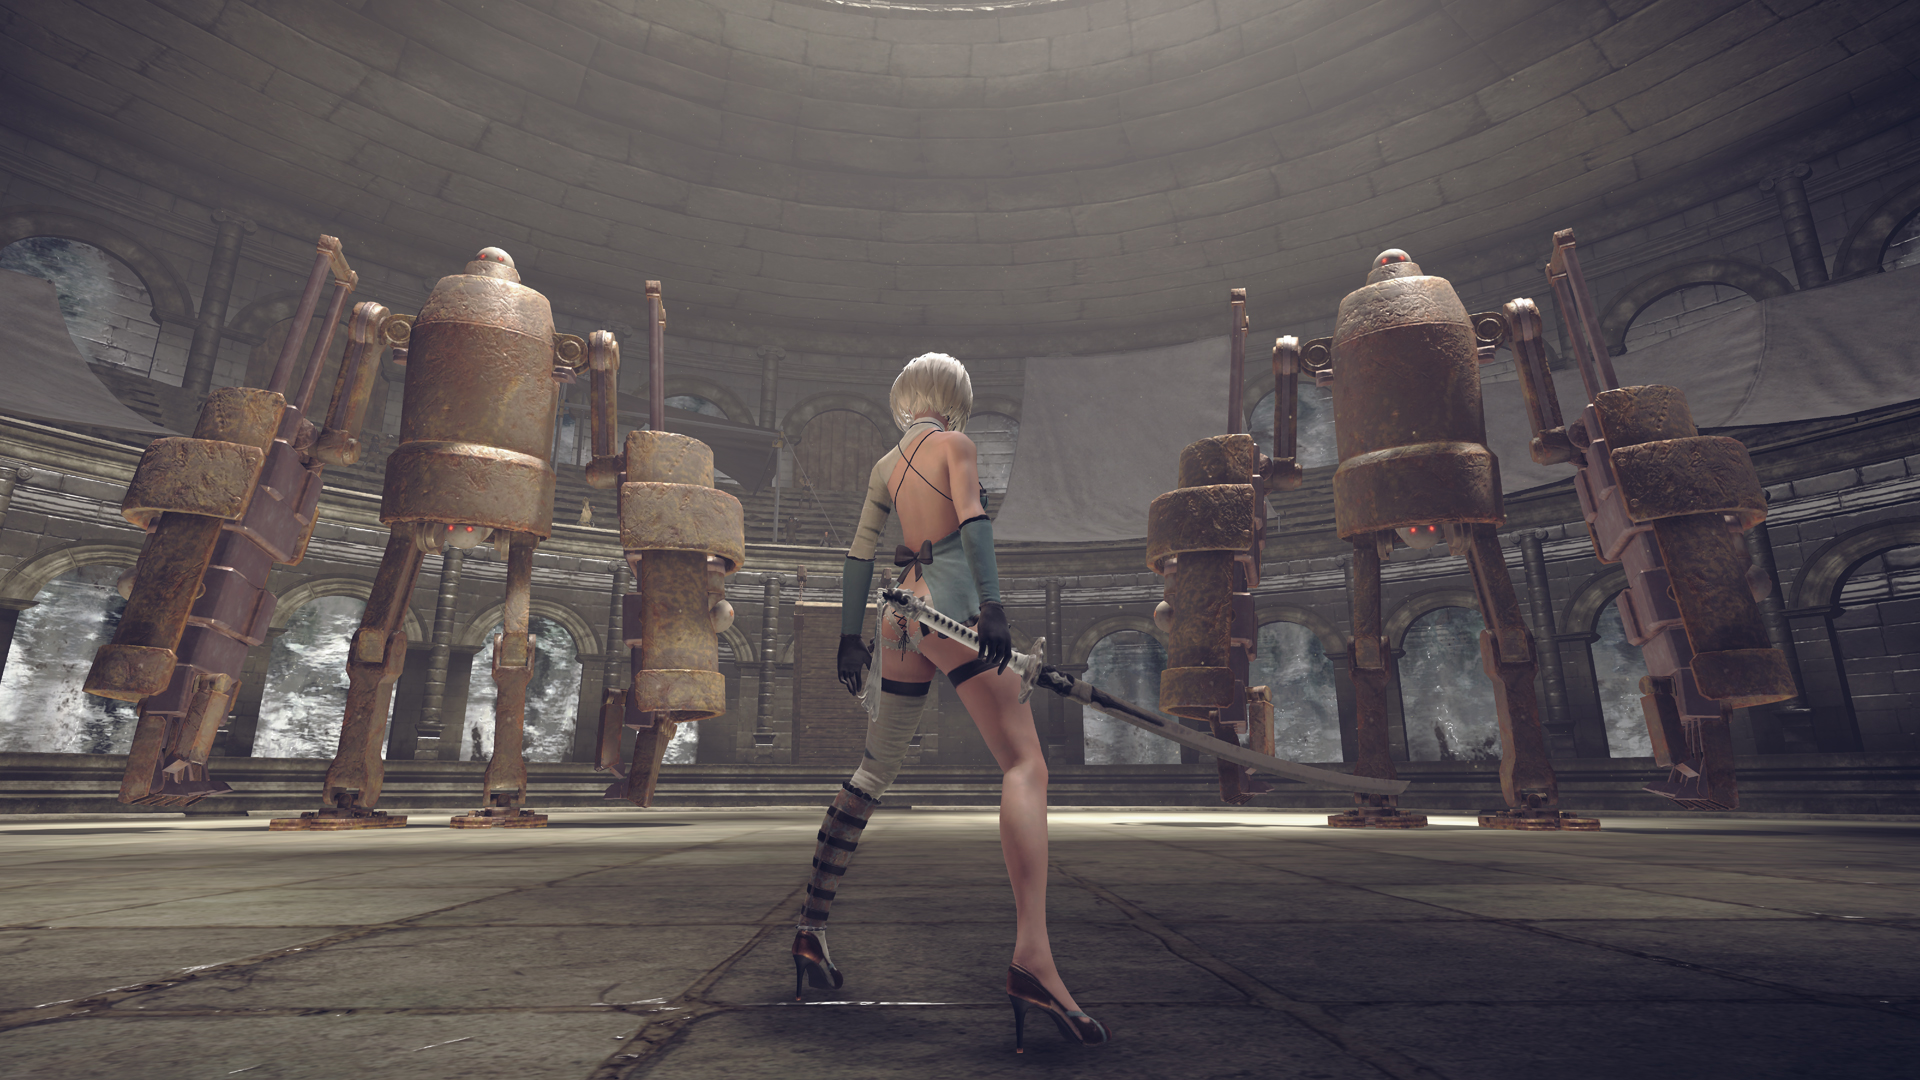 First Supplement for Nier: Automata will offer a sexy suit and combat arena